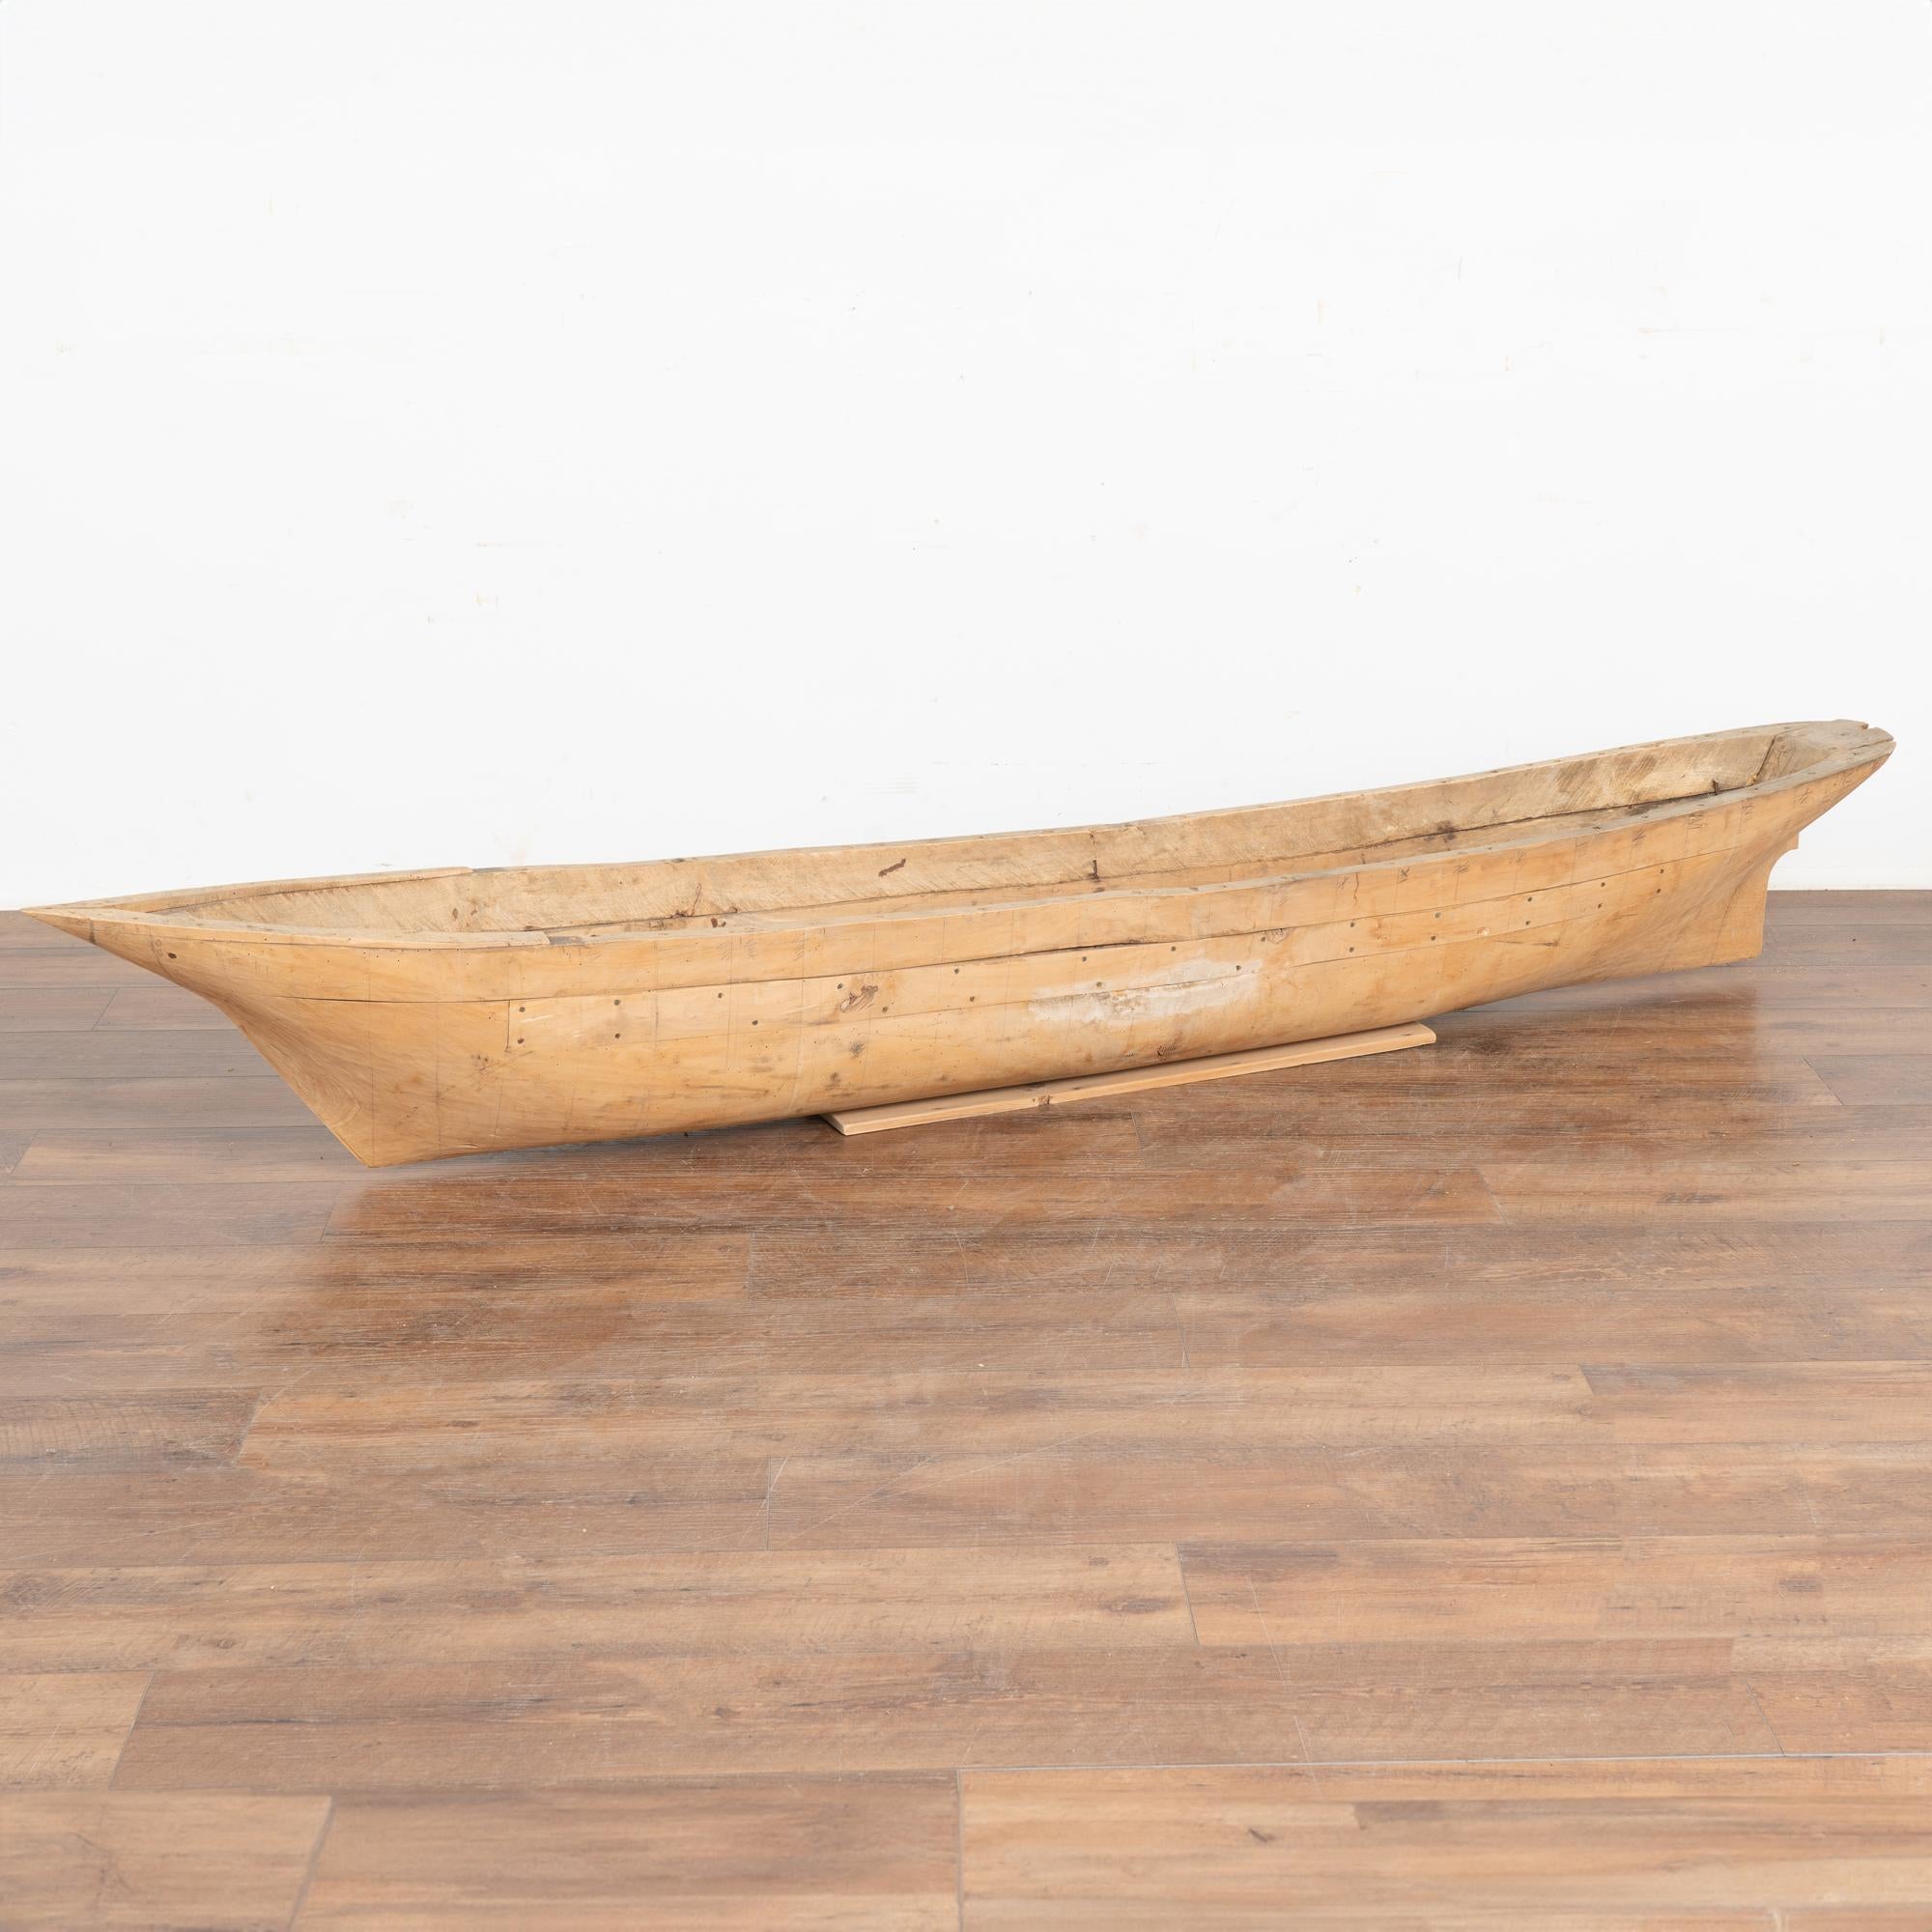 This large model boat was crafted in Denmark in the 1900's. At 7.5' long, the large size makes it a unique decorative statement piece.
Note the hand-hewn elements, sections screwed together, pencil grafting, etc that all combine to create the